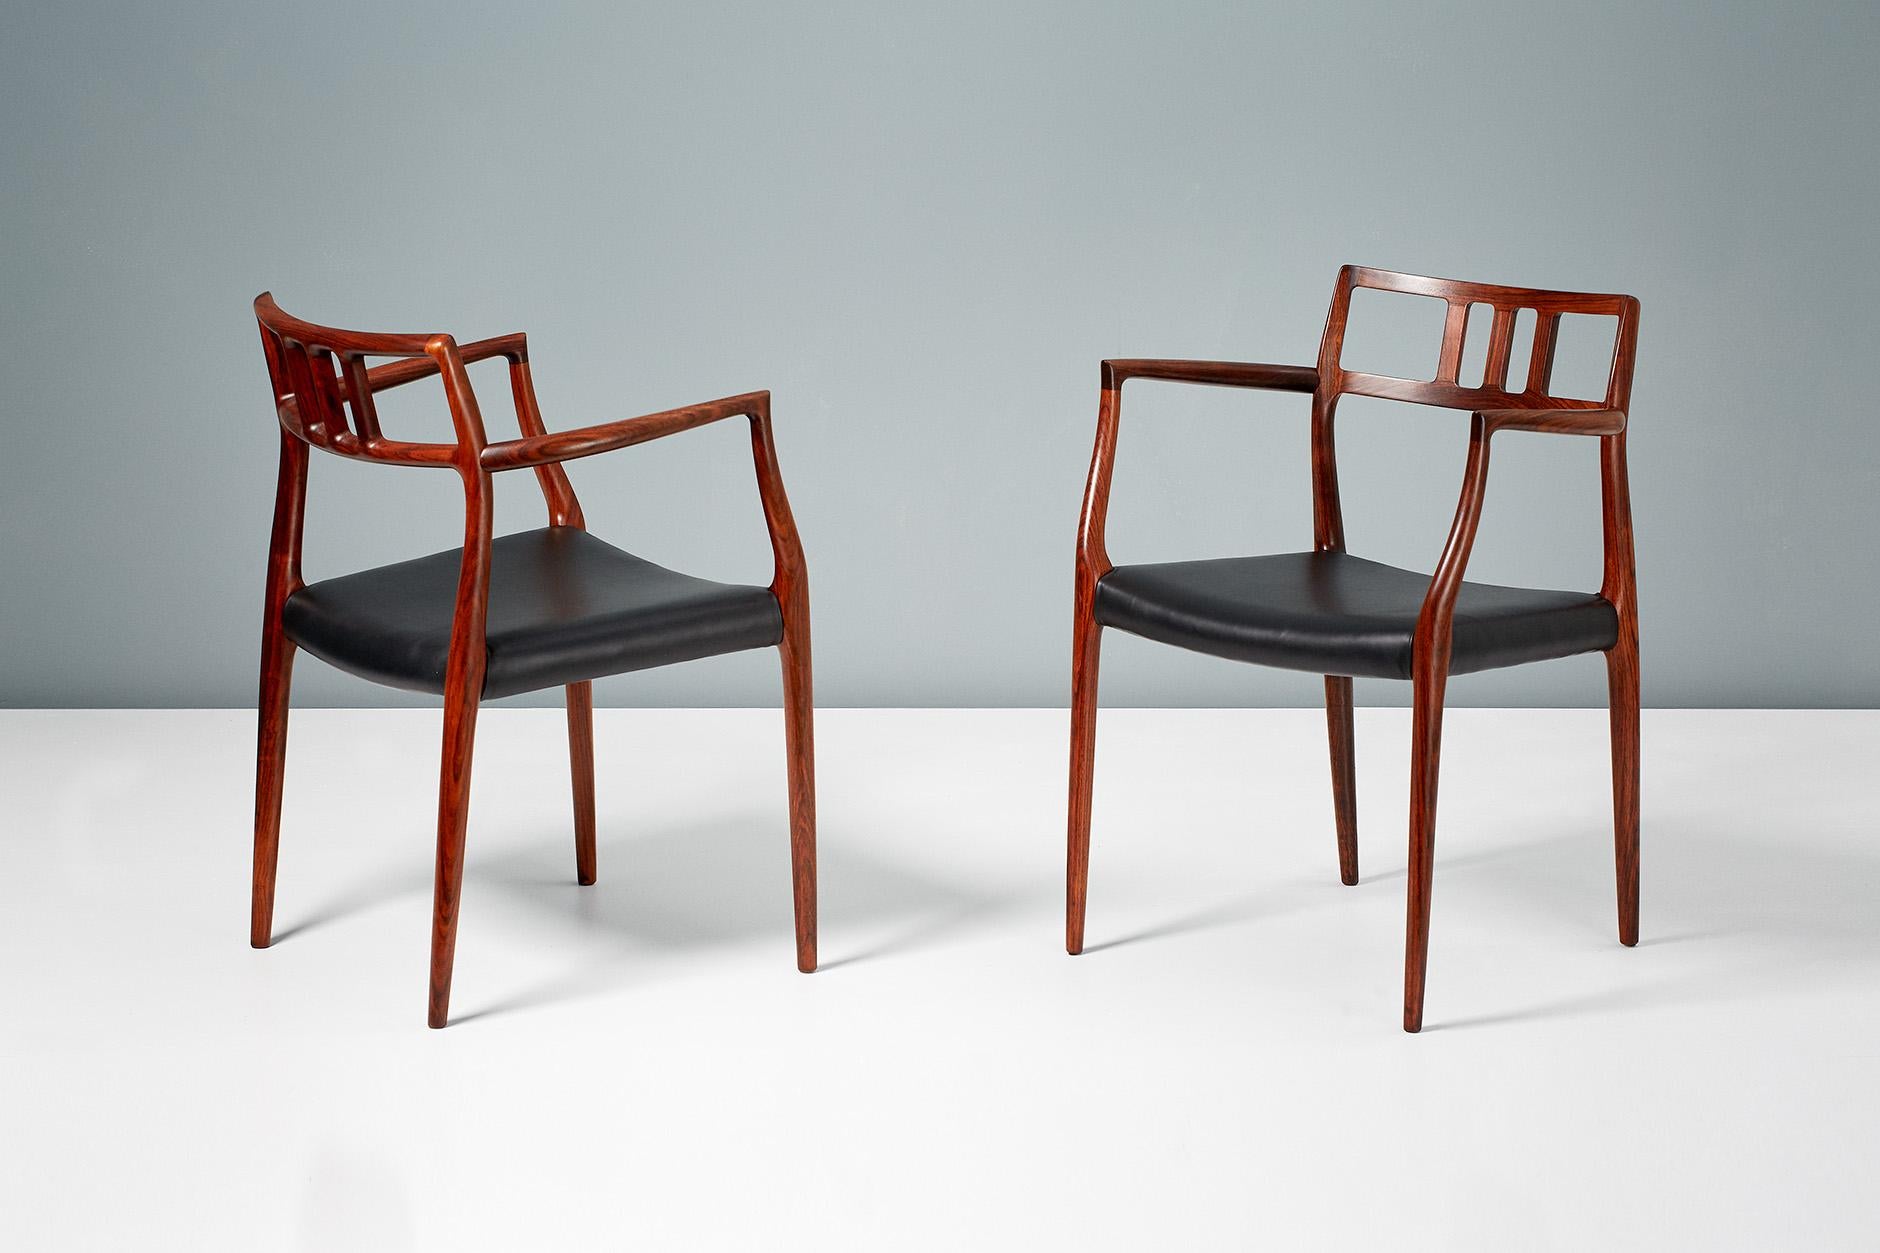 A pair of Model 64 rosewood armchairs produced by J.L. Moller Mobelfabrik in Denmark, circa 1966. The stunning rosewood frames have been refinished and the seats newly covered in premium aniline black leather.